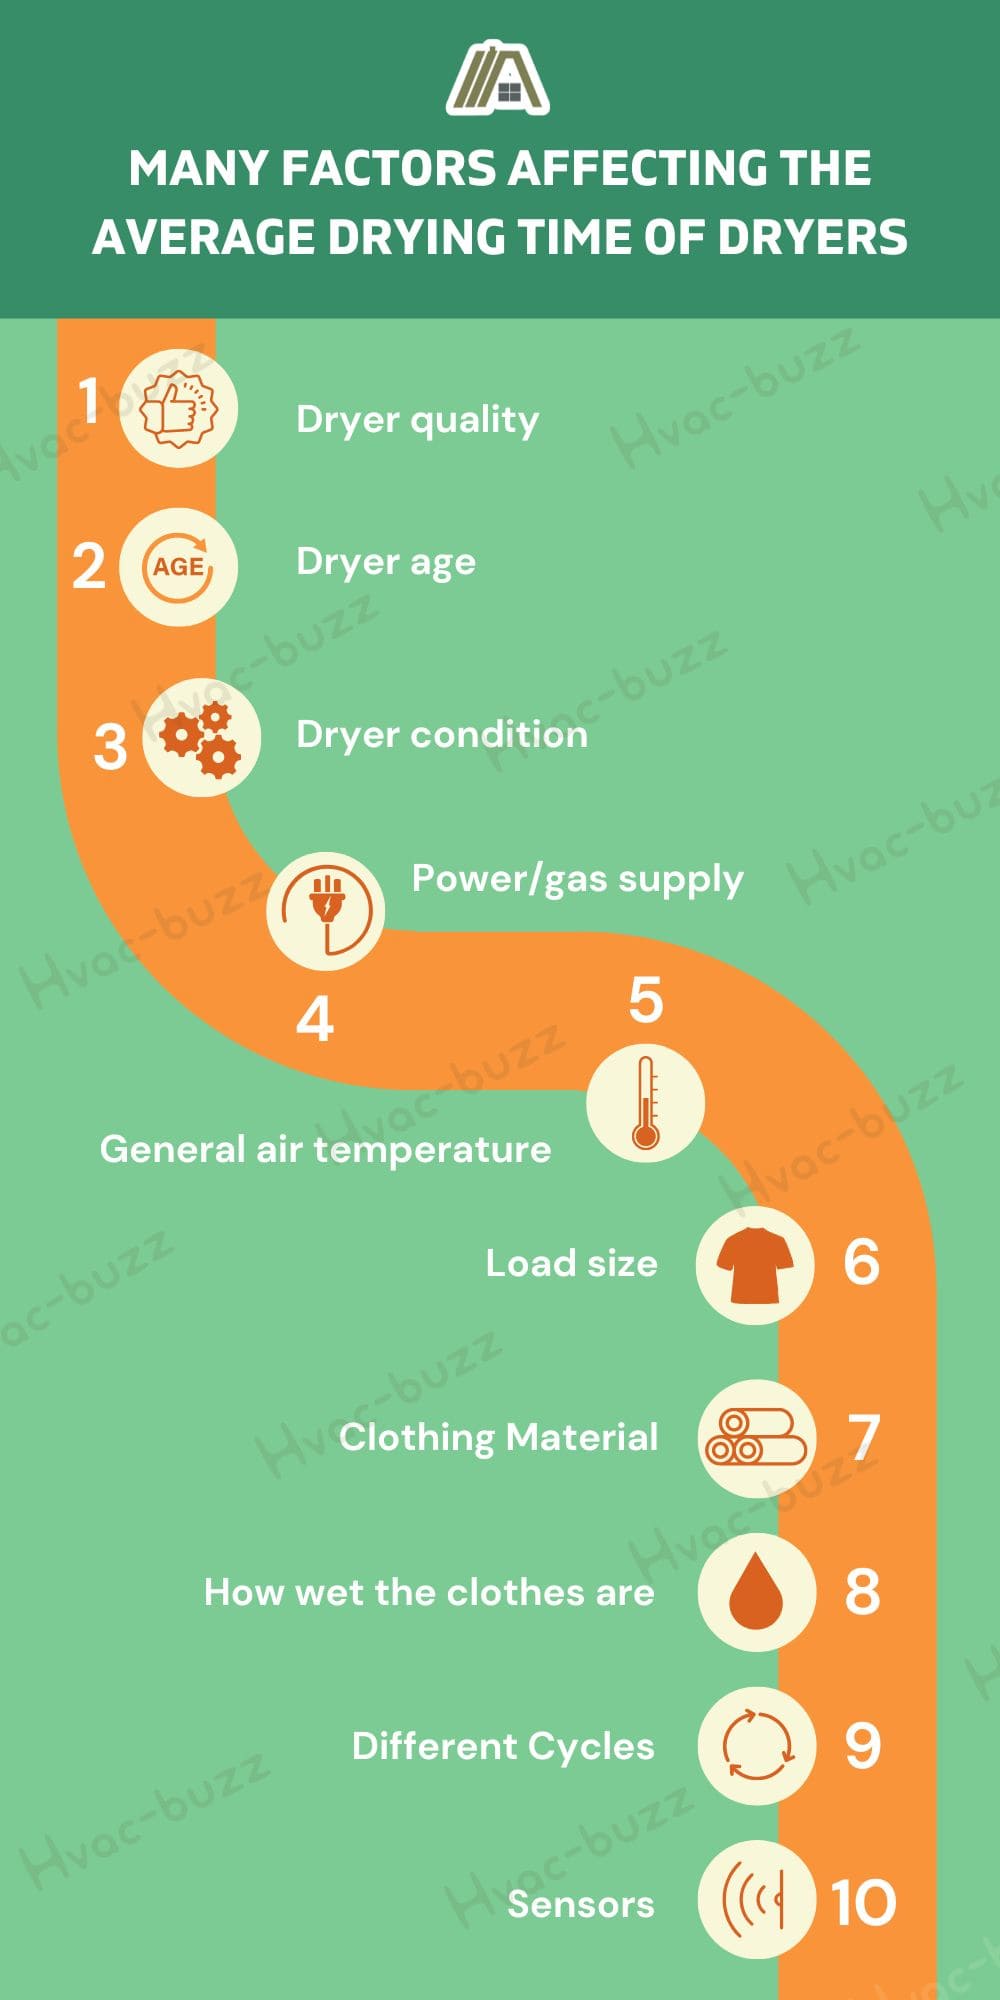 Many factors affecting the drying time of a dryer